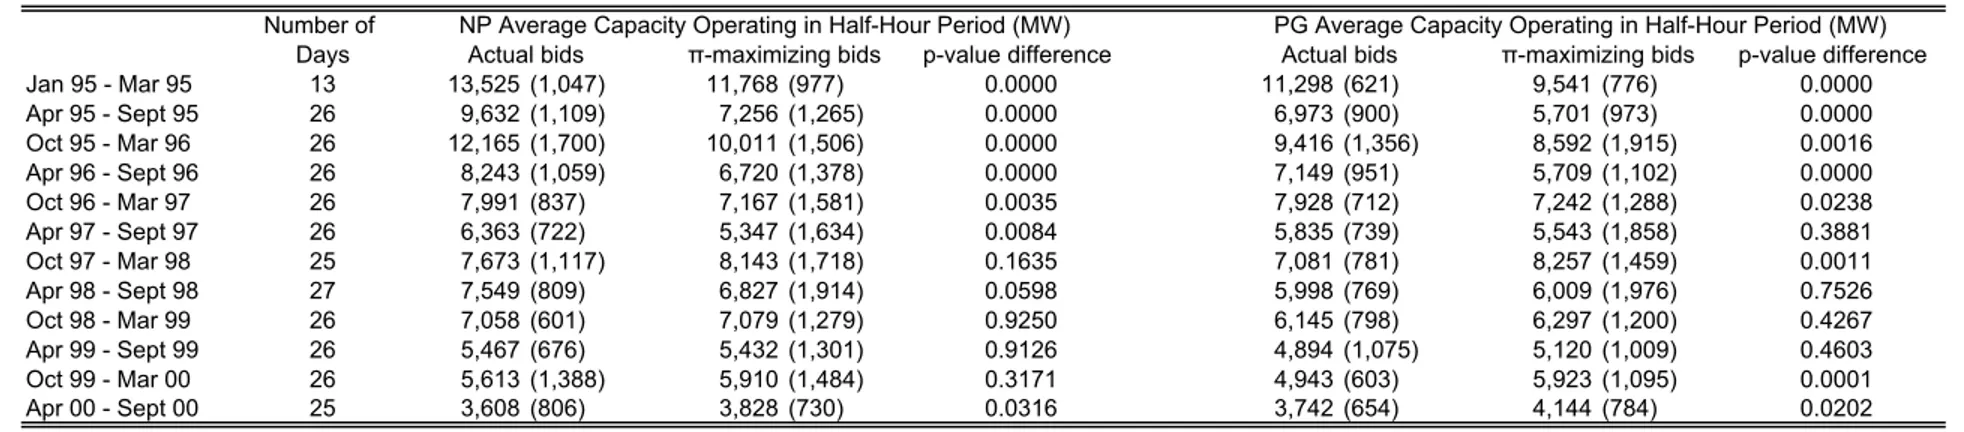 Table 2: Comparison of Estimated Generator Wednesday Output With Actual Bids and Bids Estimated to Maximize Profits